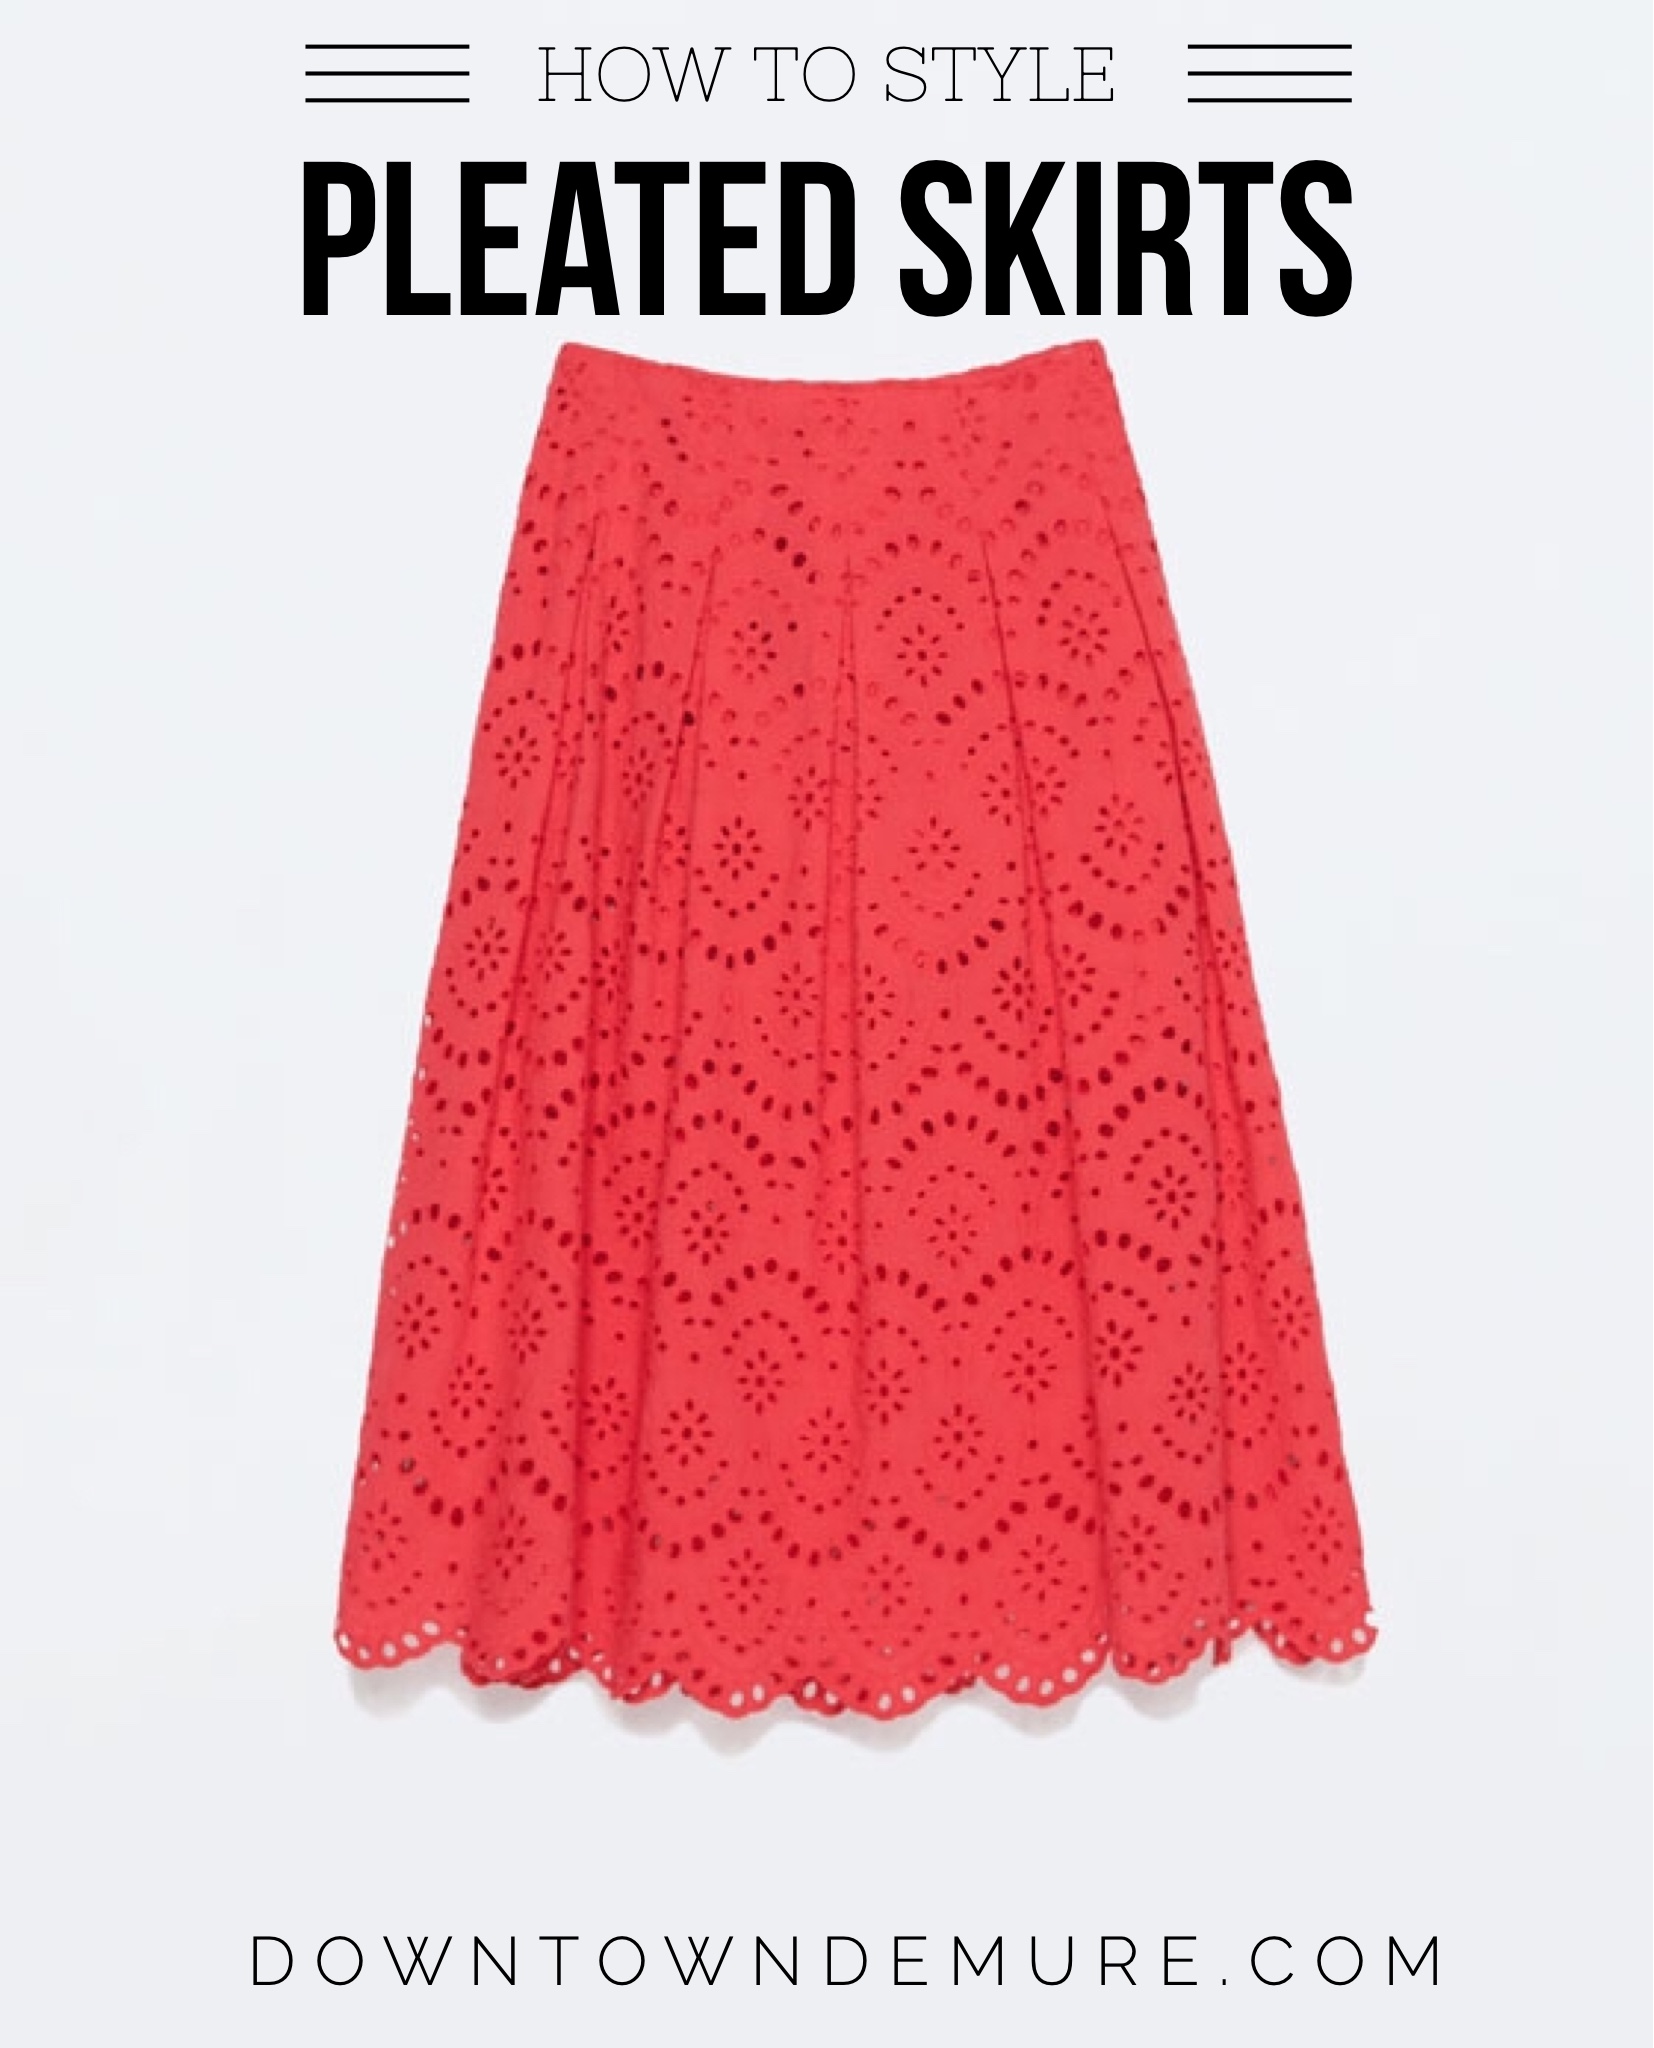 How to style a pleated skirt - downtown demure